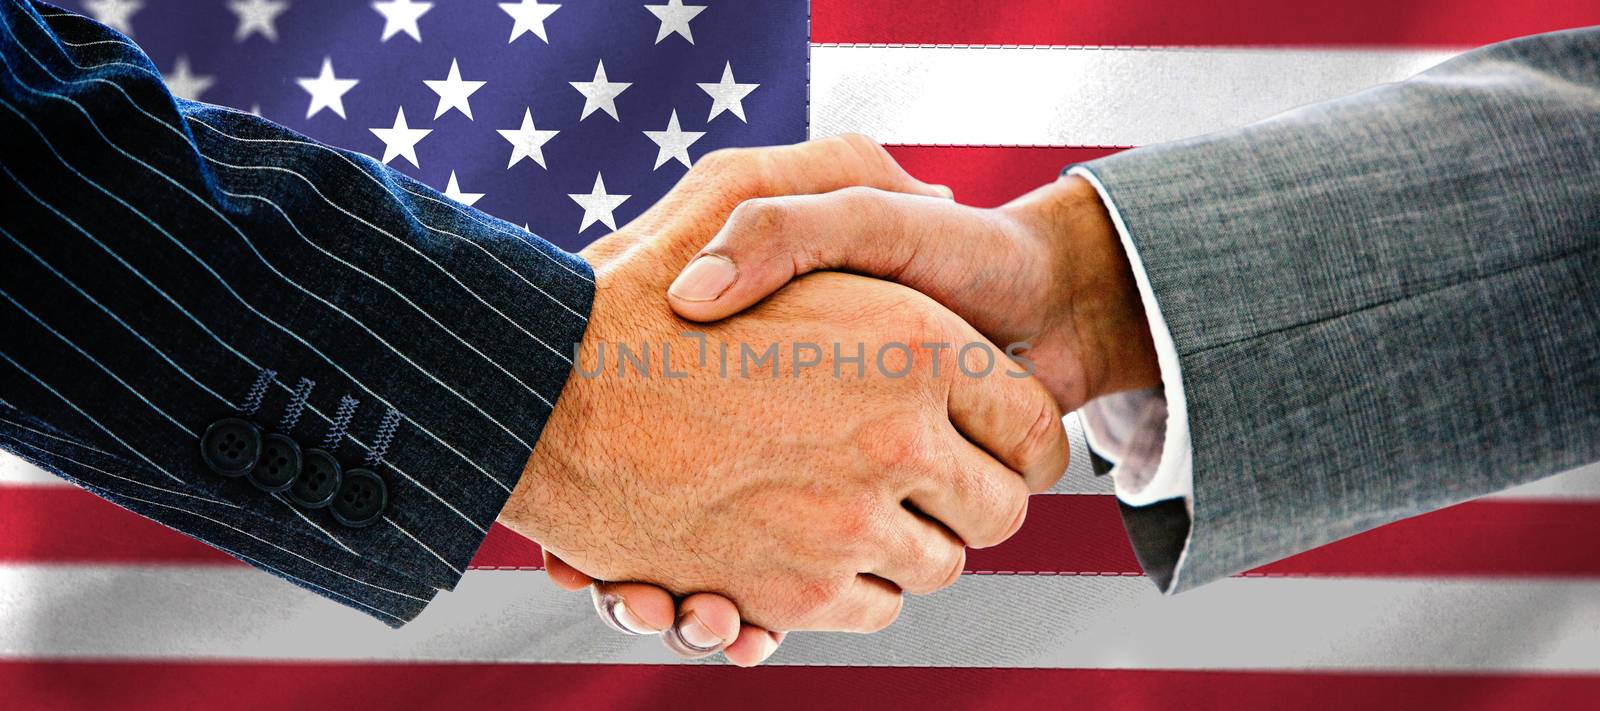 Business people shaking hands against black wall